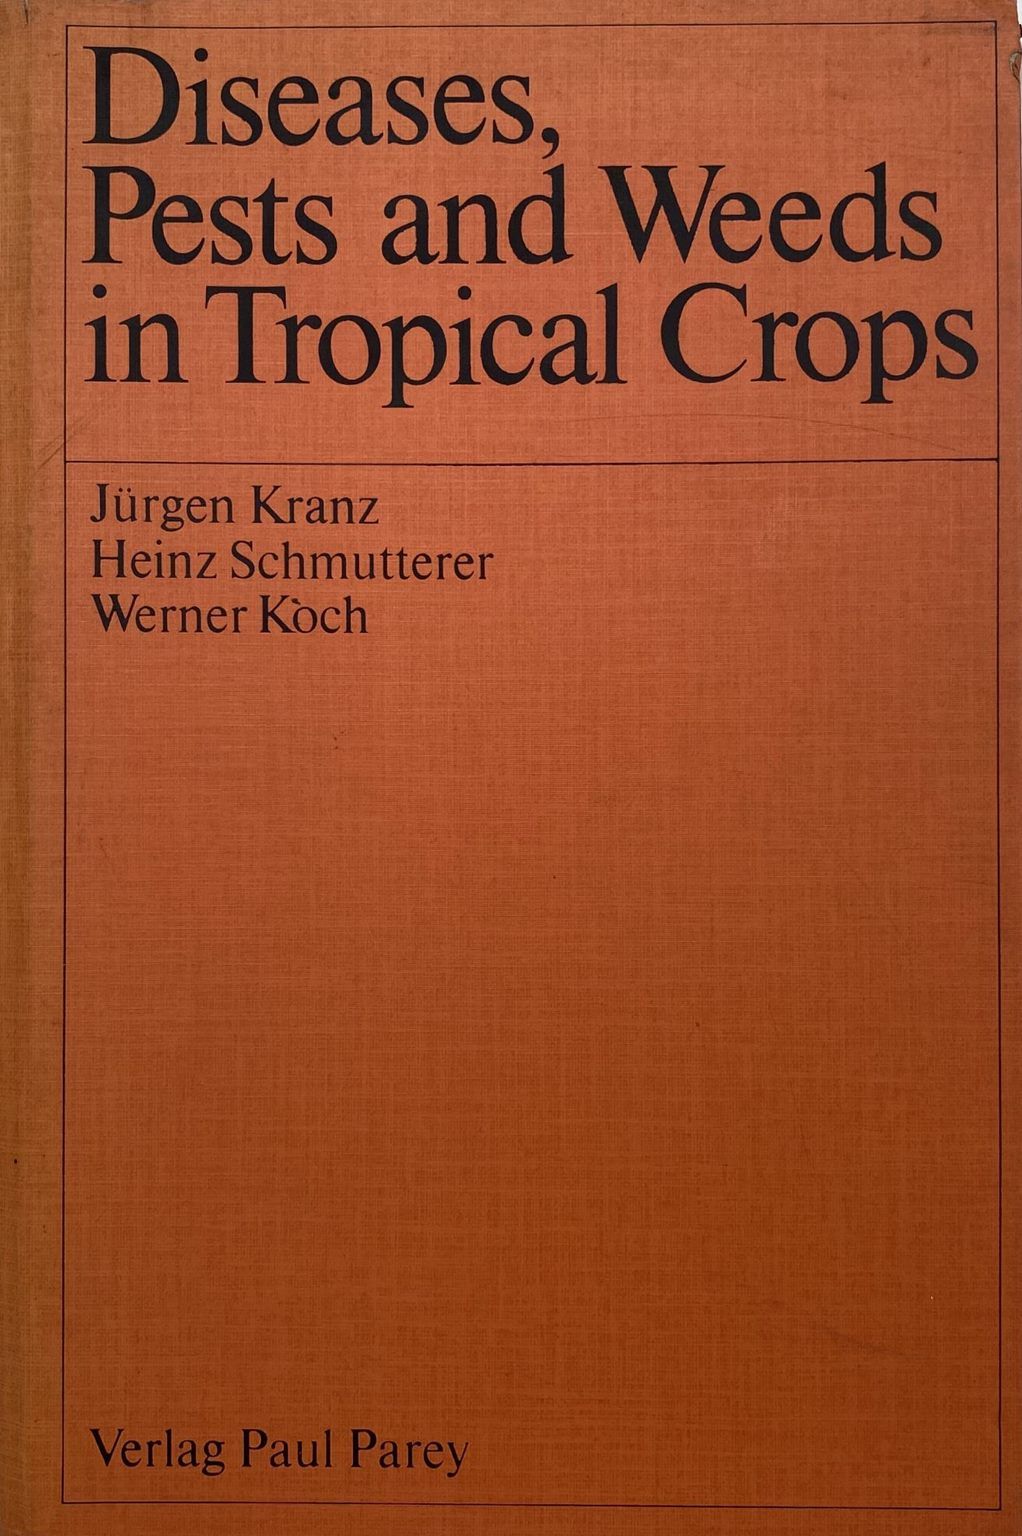 Diseases, Pests and Weeds in Tropical Crops